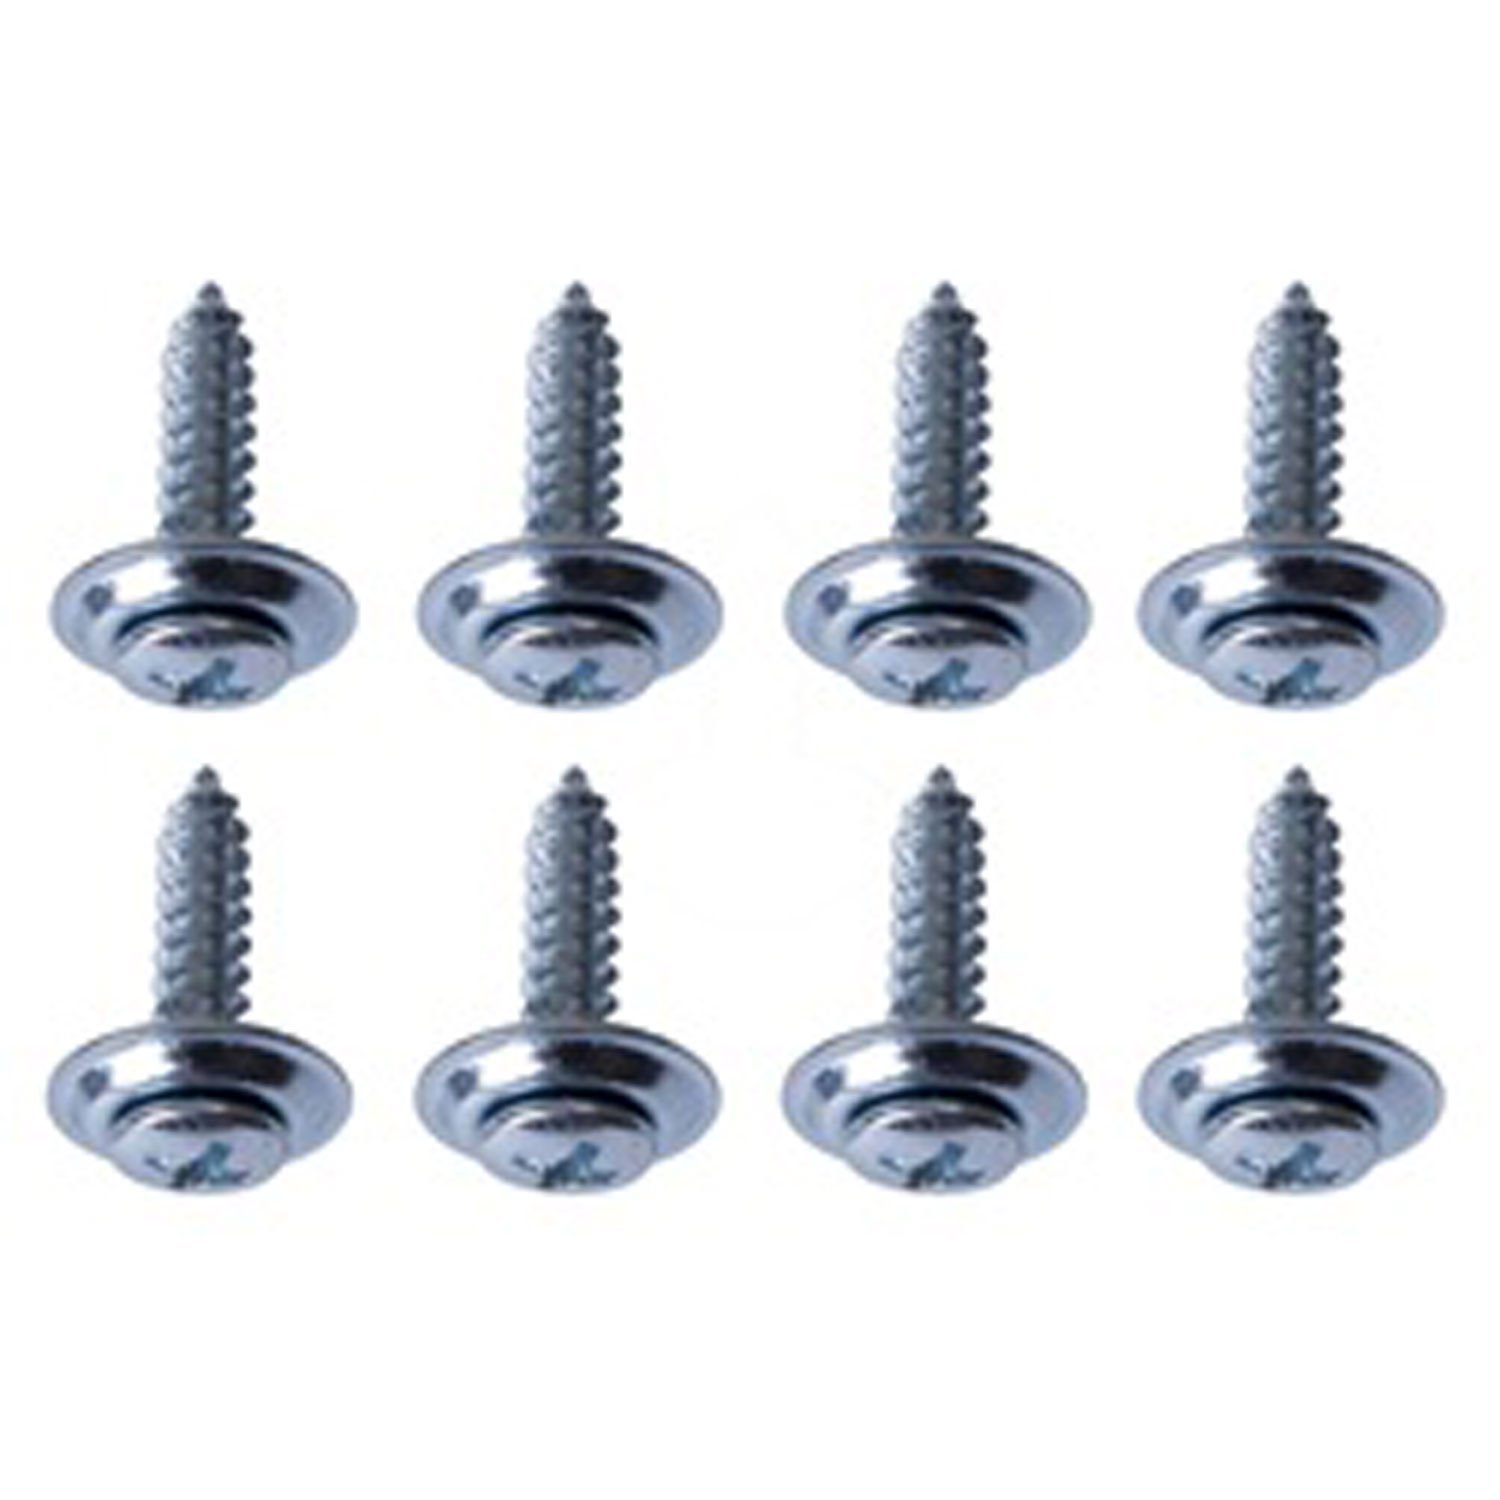 This dash pad screw kit from Omix-ADA allows you to secure your dash pad on 76-83 Jeep CJ5 76-86 CJ7 and 81-86 CJ8.